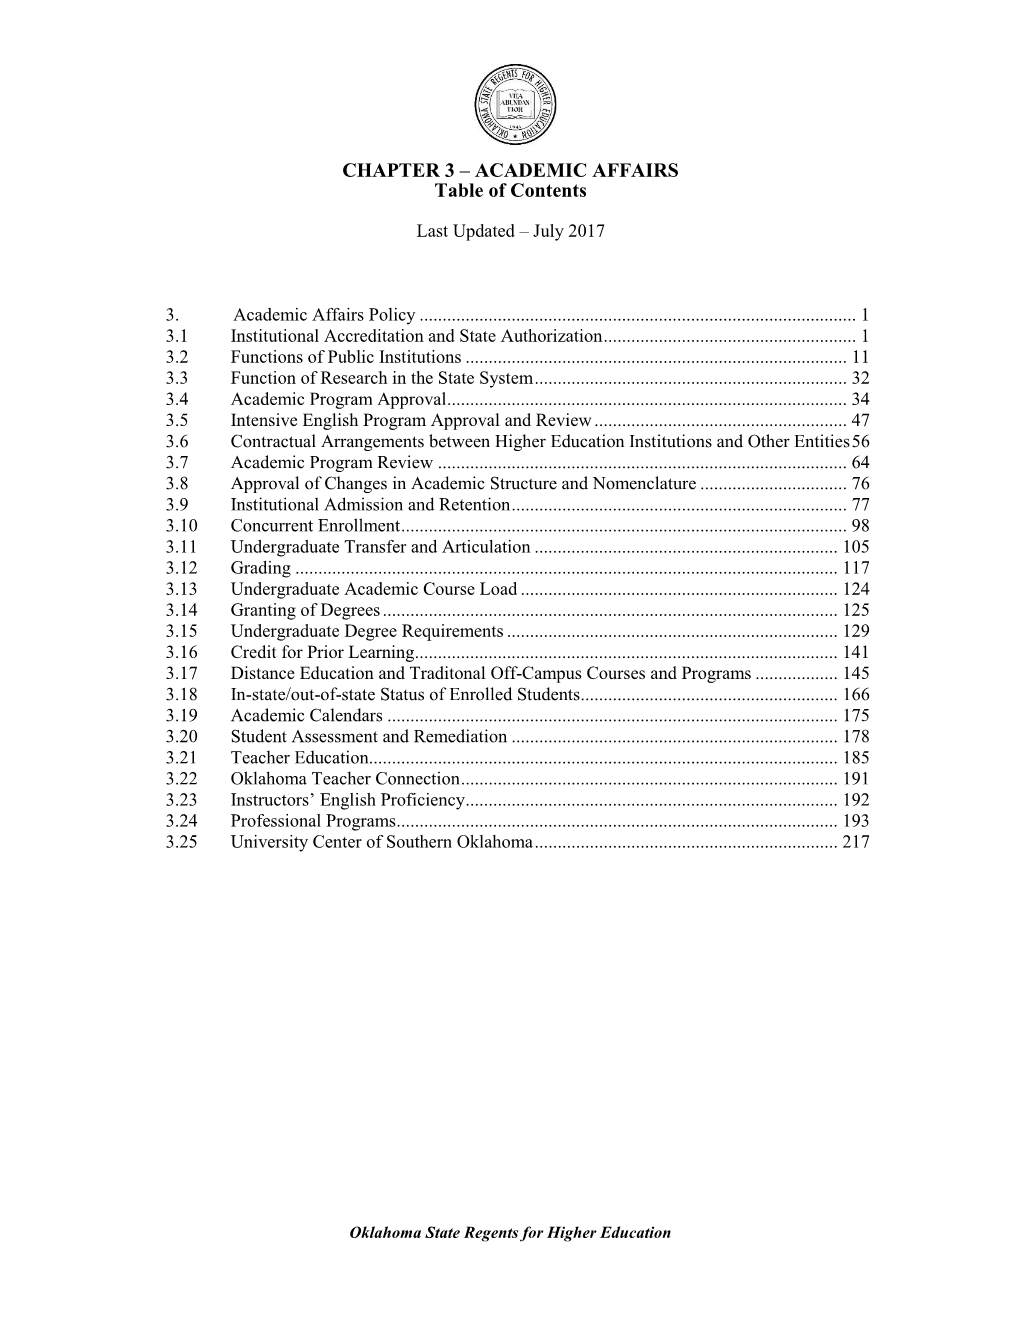 ACADEMIC AFFAIRS Table of Contents